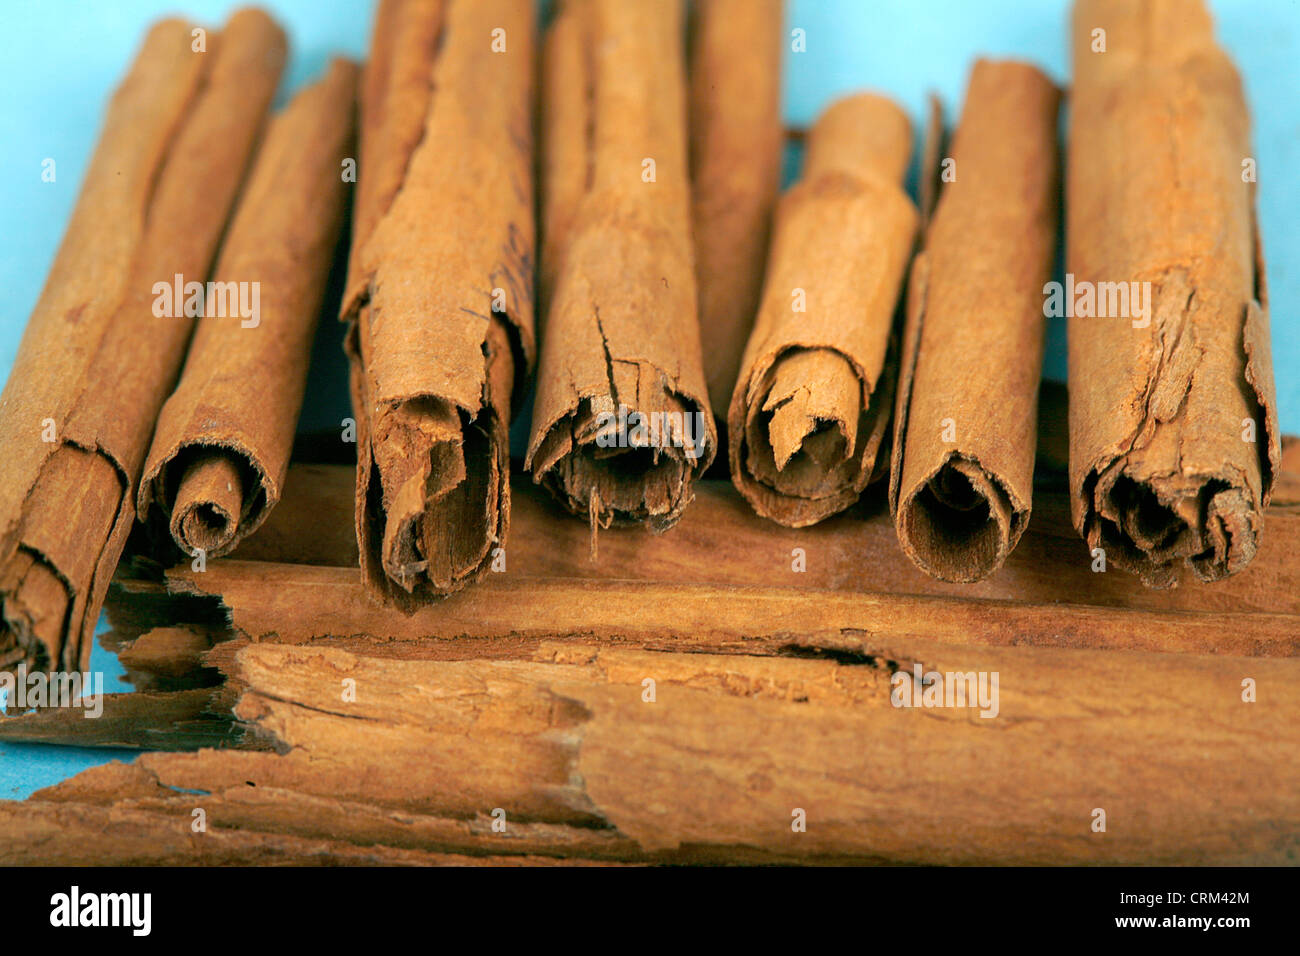 Cinnamon sticks as a herbal medicine have been traditionally been used to treat toothache and fight bad breath, to stave off the common cold, and aid digestion. Stock Photo